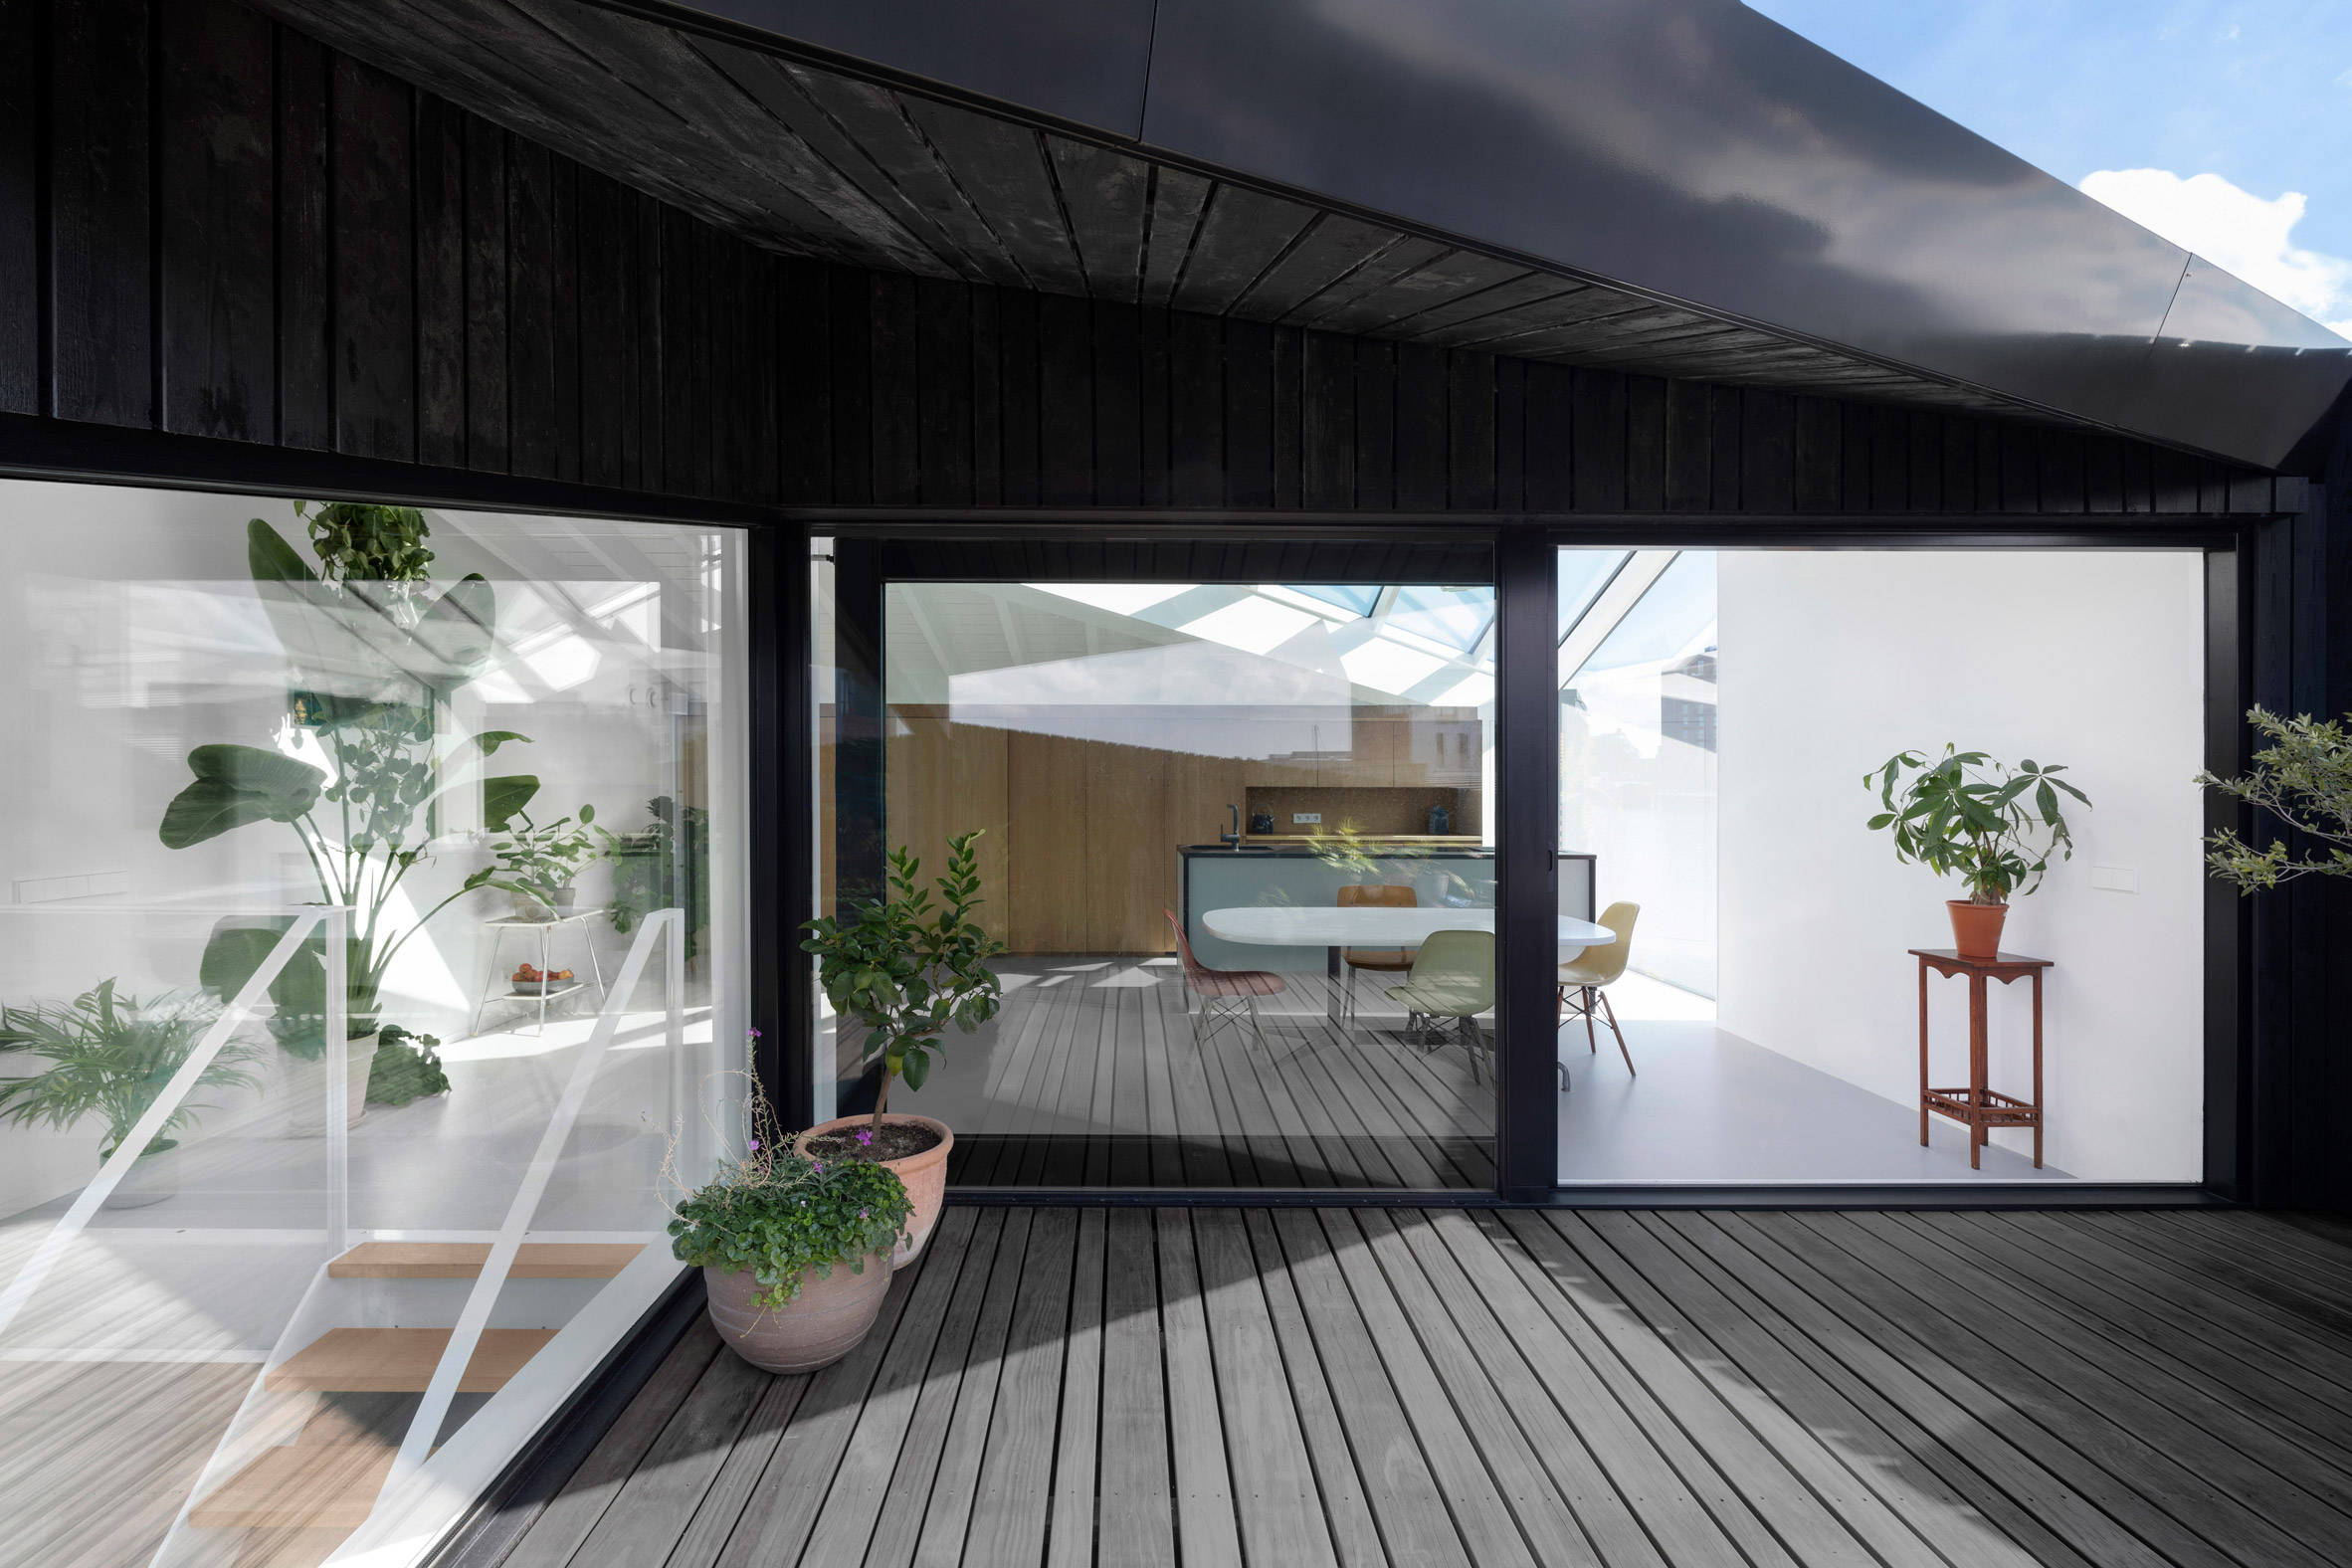 The hidden terrace of the floating house by i29